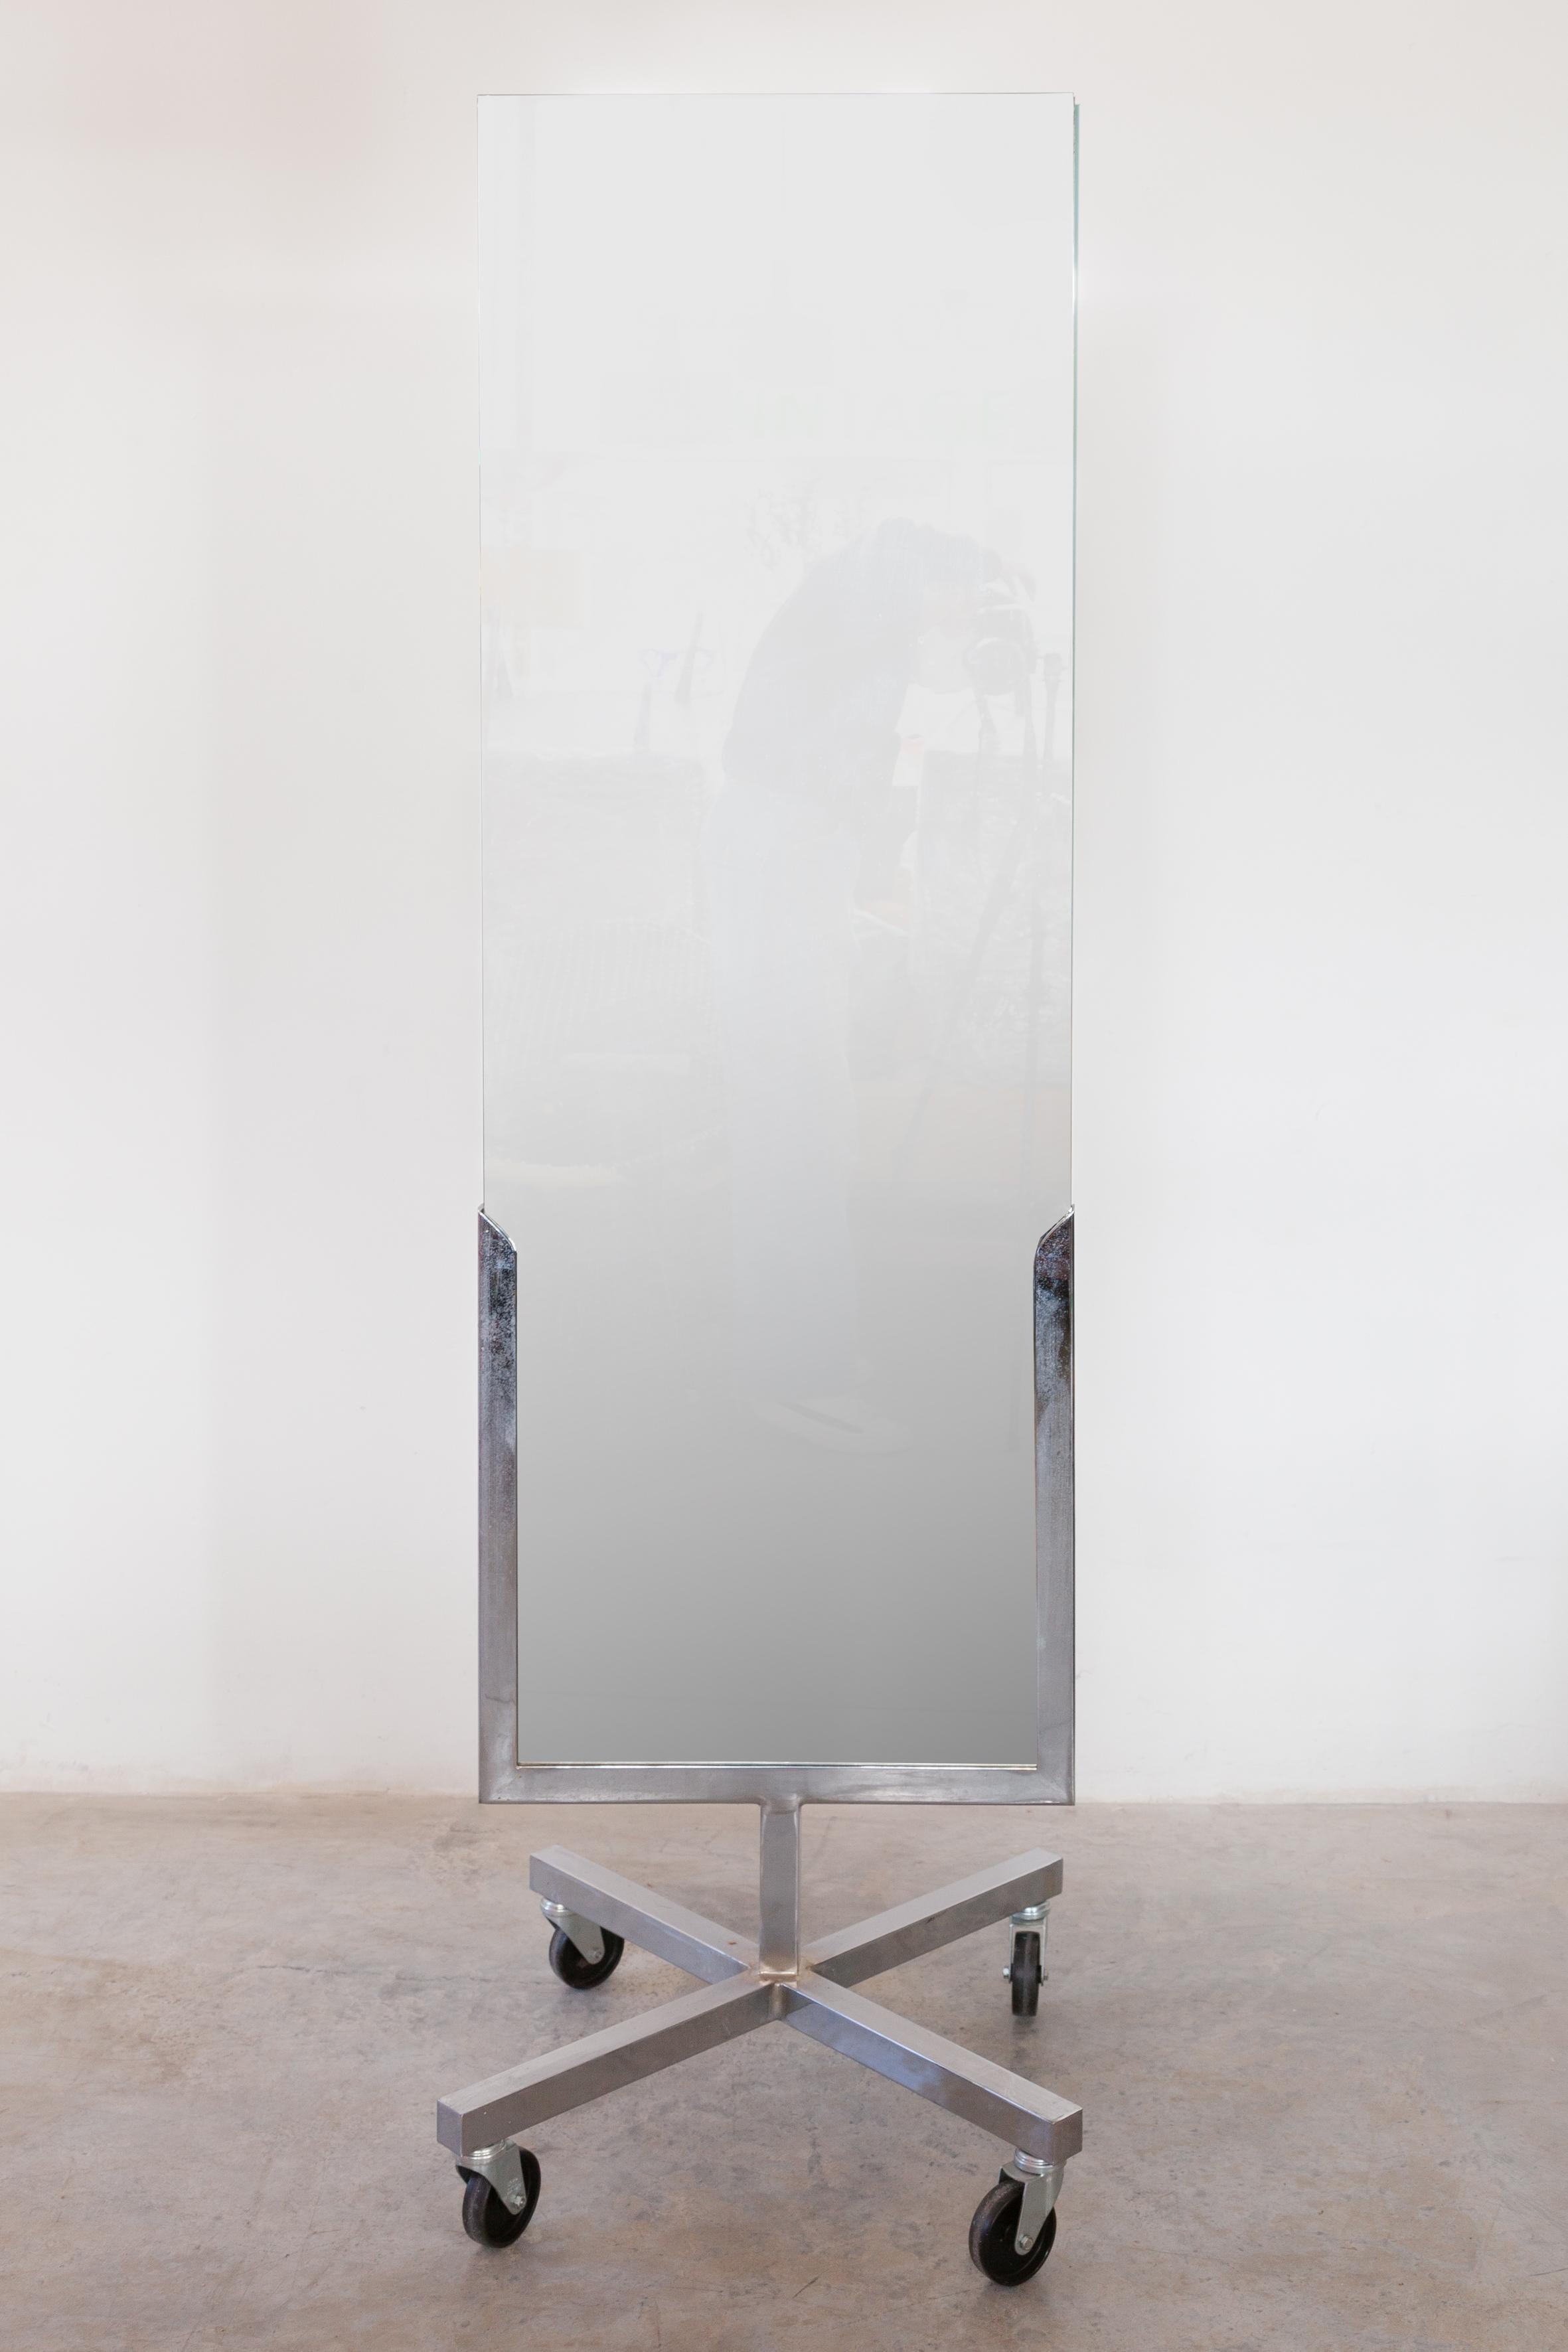 Freestanding rectangular full model length floor mirror double sided, movable on casters in any desired position made in Belgium, 1960s.
Dimensions: W 50, D 30, H 180 cm.